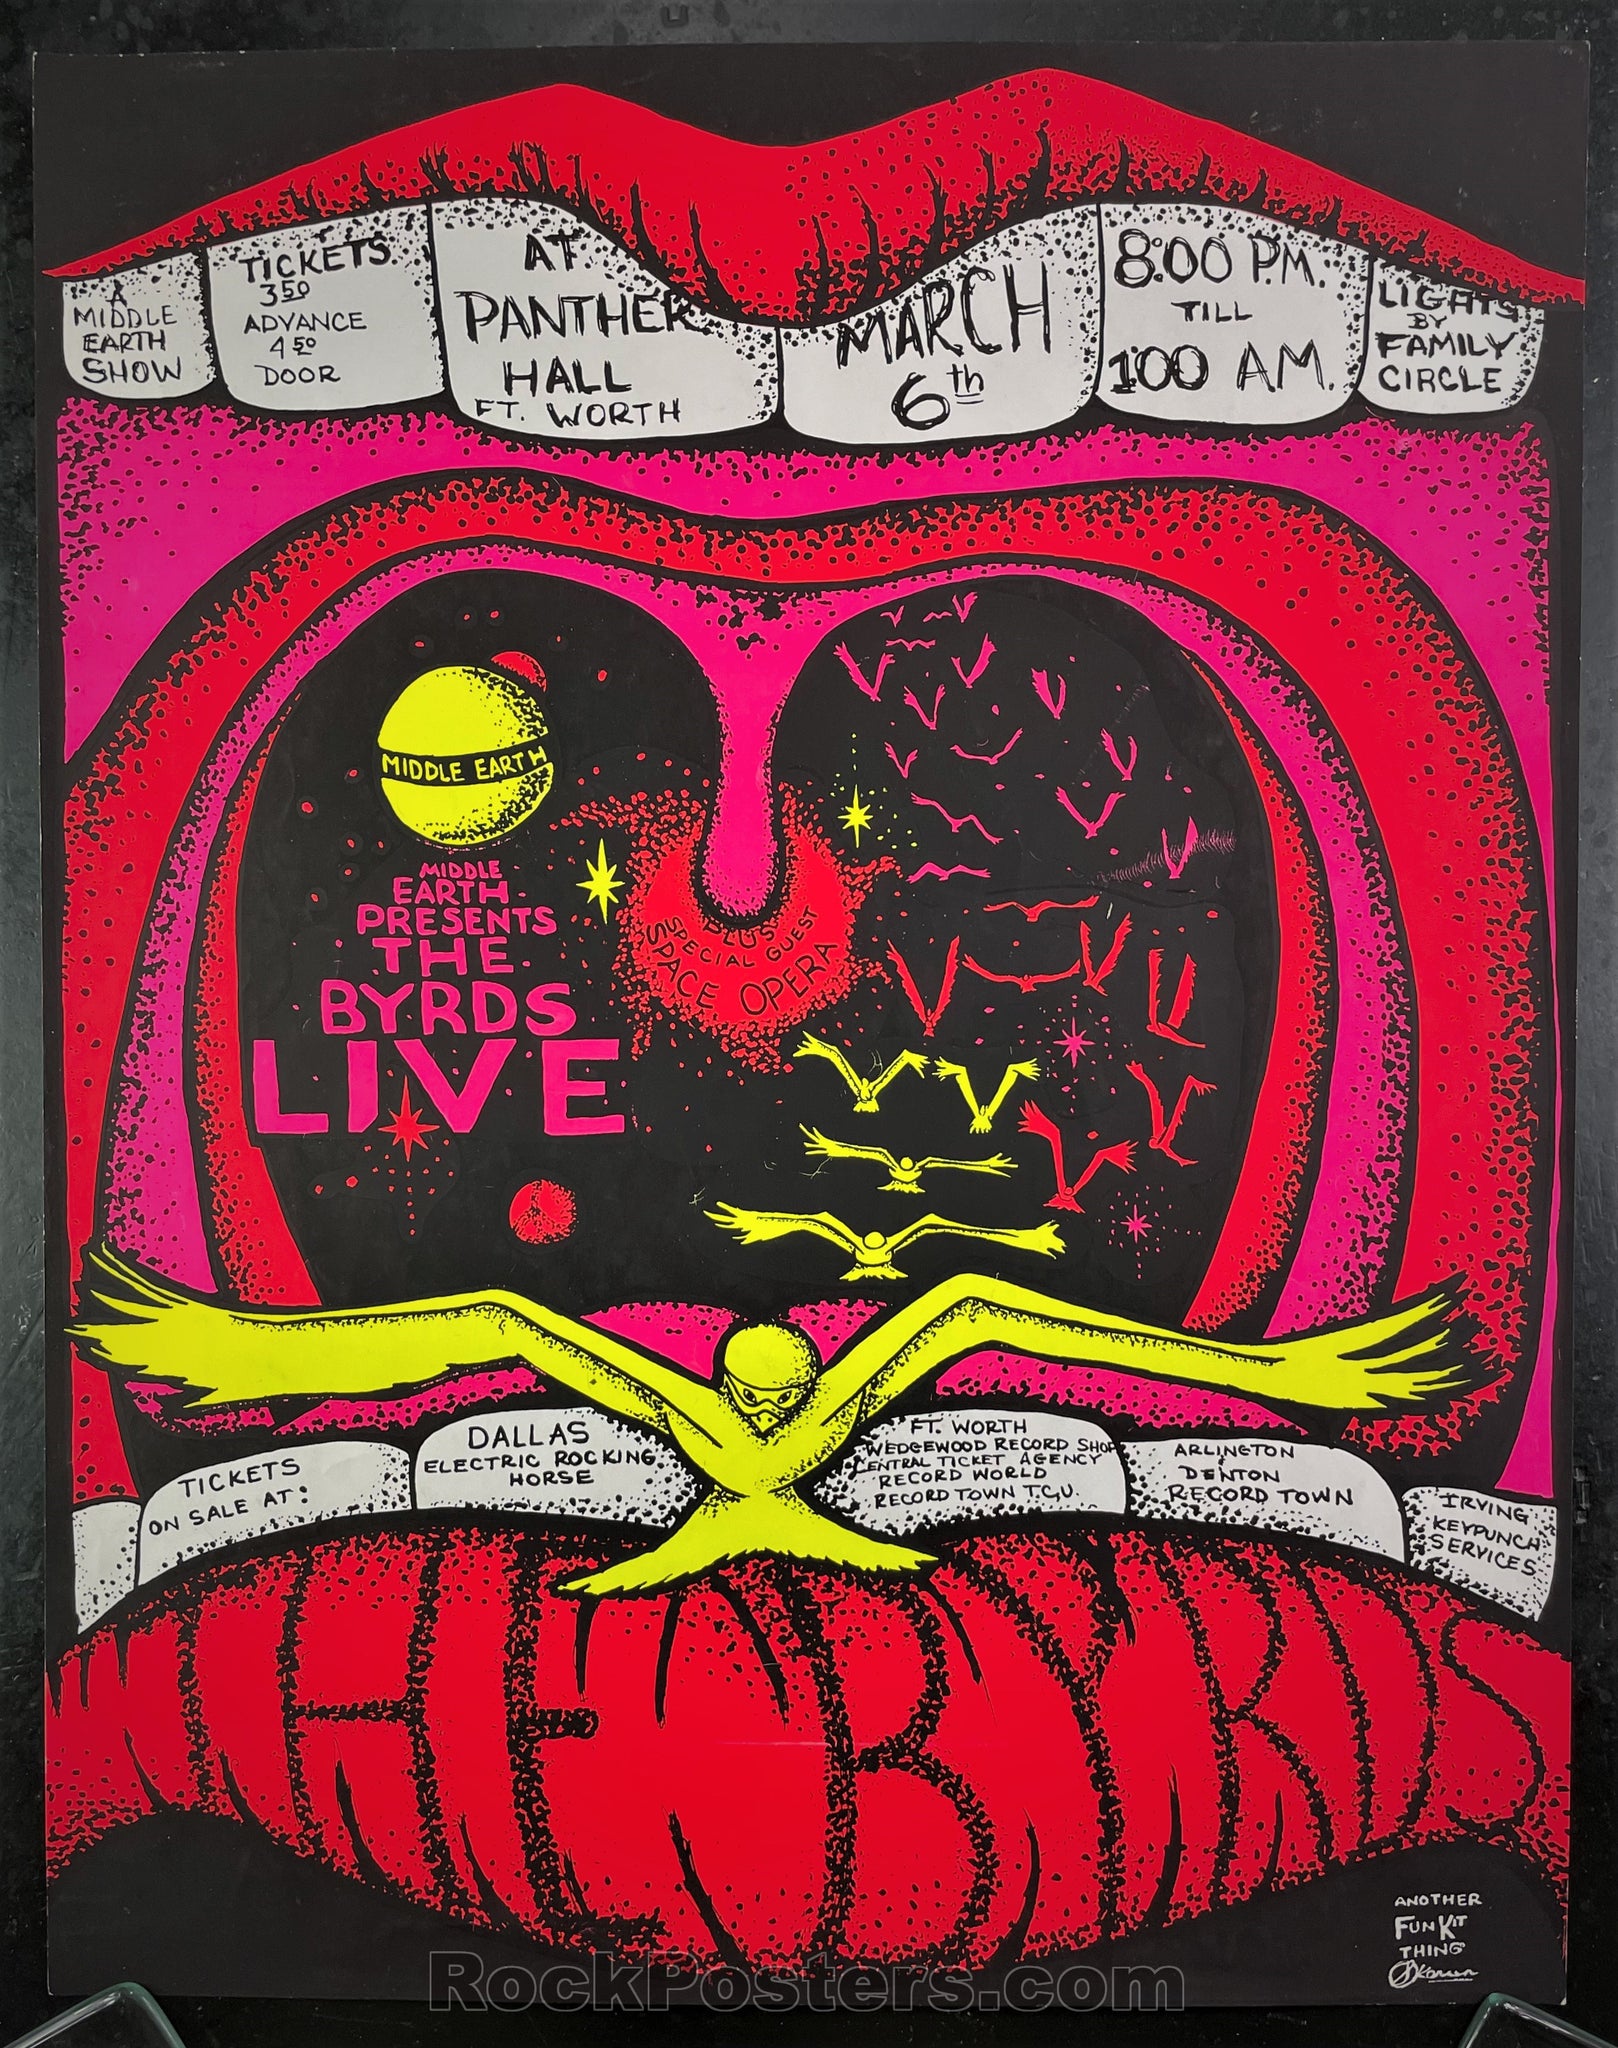 AUCTION - The Byrds - Panther Hall - 1970 Poster - Near Mint Minus